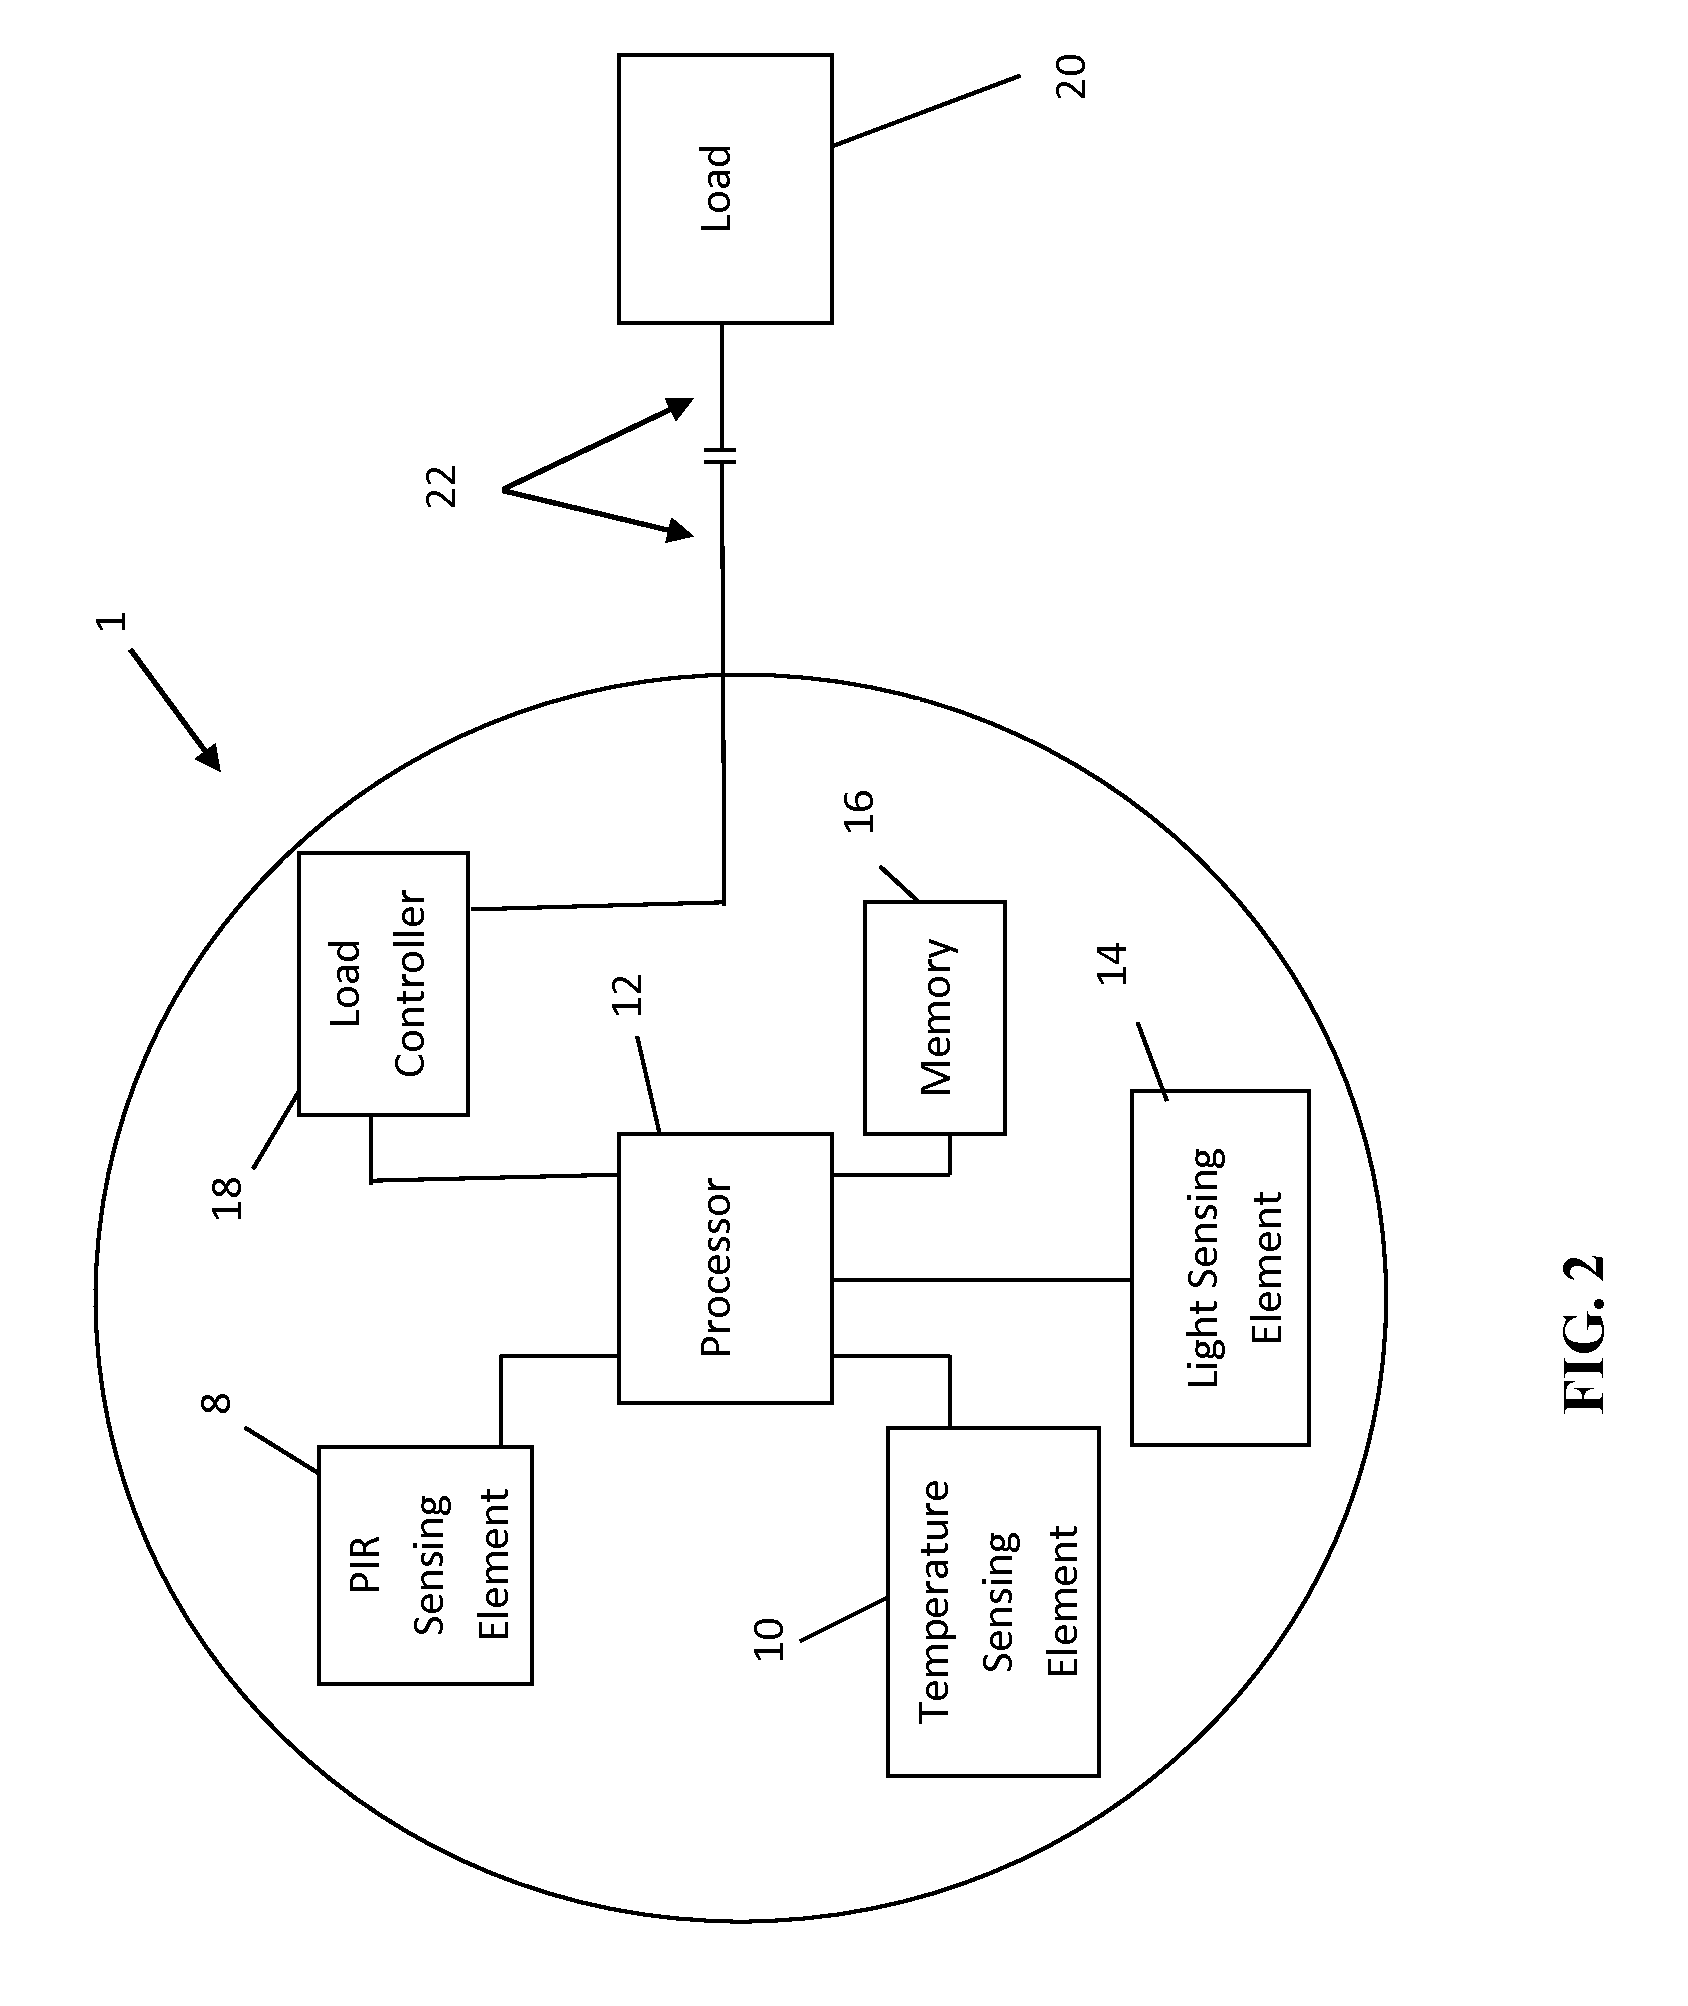 System and method for occupancy sensing using adjustable detection and load control profile